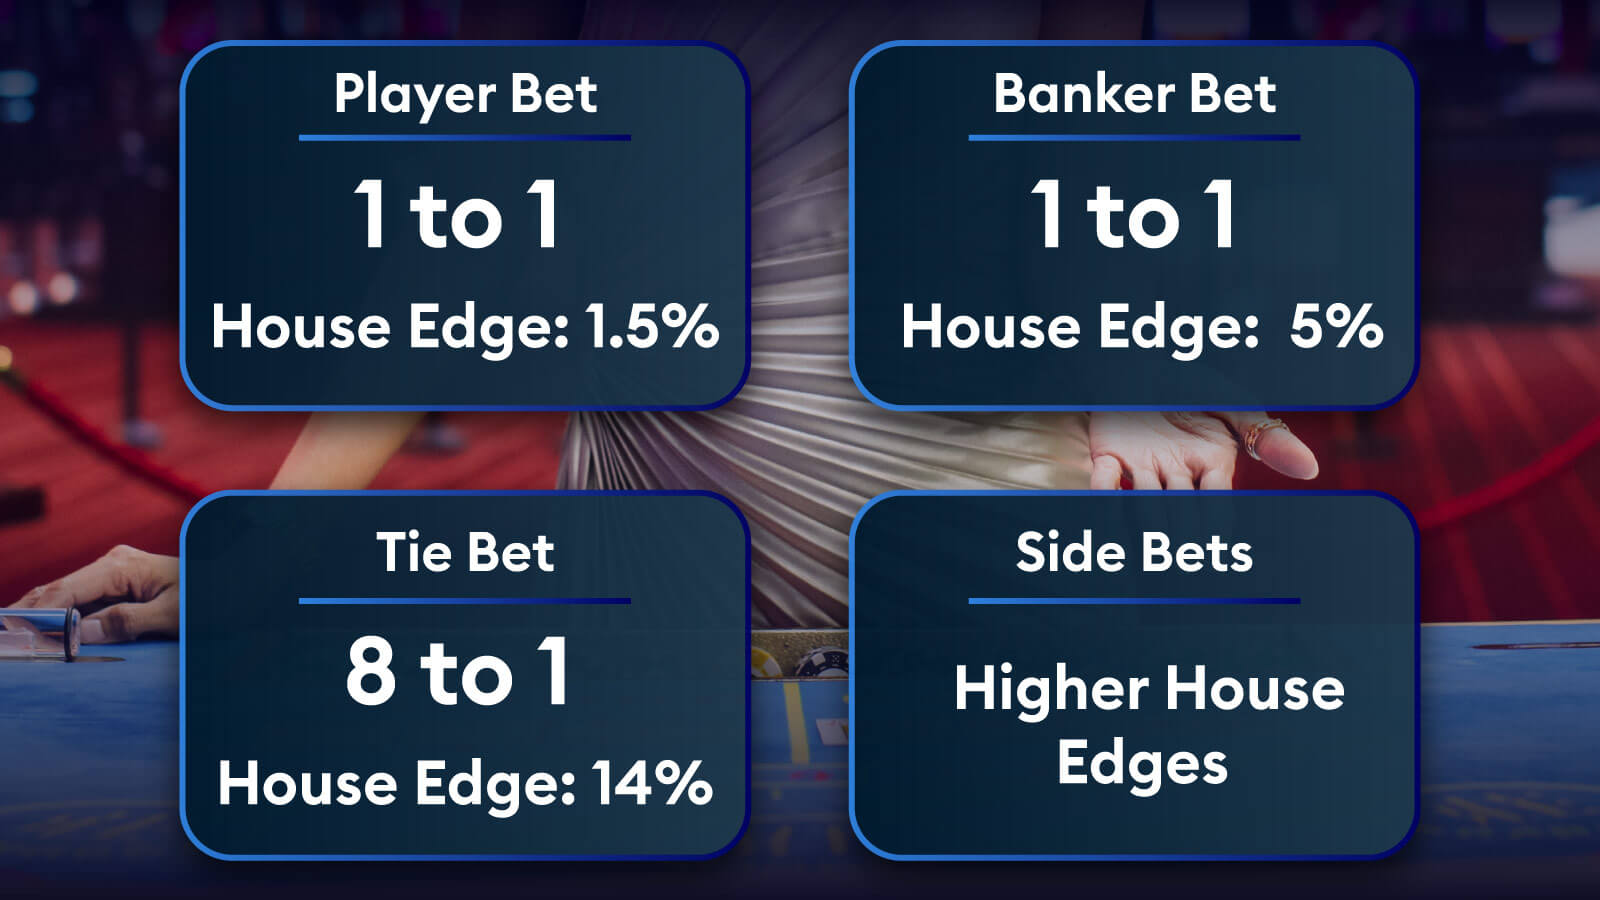 Understanding Baccarat Bets Made Simple